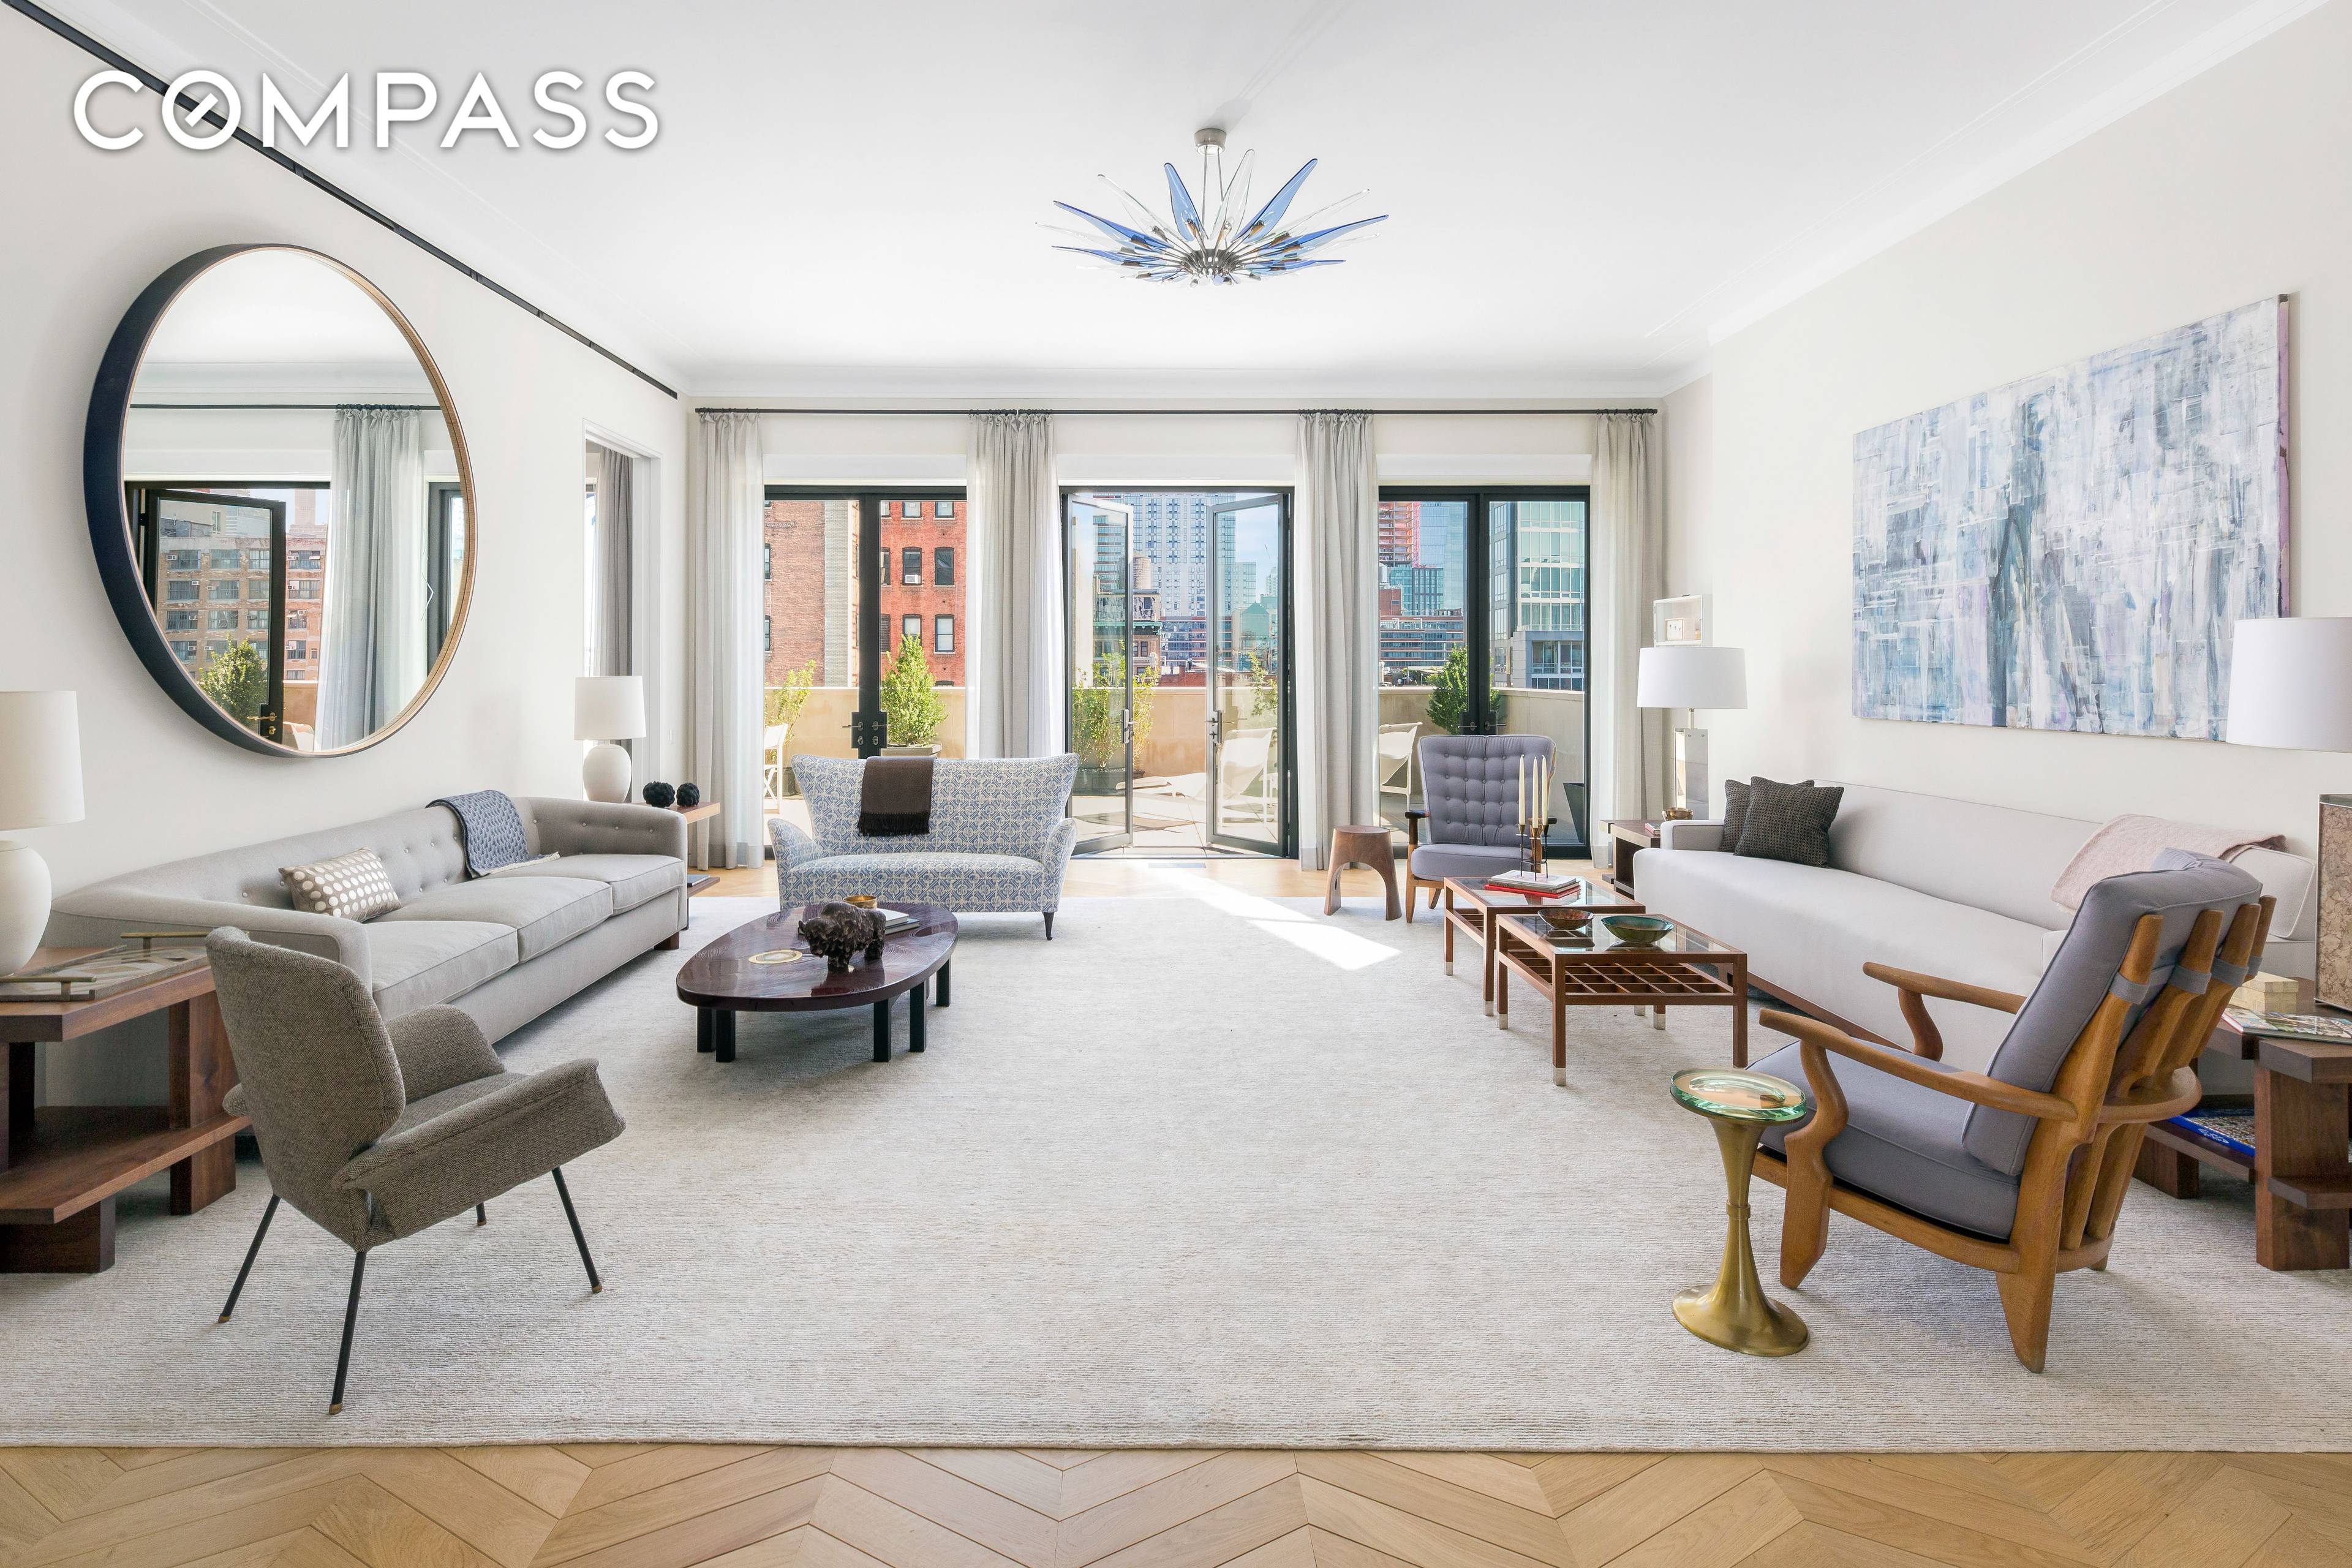 West Chelsea Contemporary Classic Penthouse designed by Architectural Digest architect Steven Harris Perched above a brand new elegant limestone clad building with bronze framed windows is this exceptional duplex penthouse ...